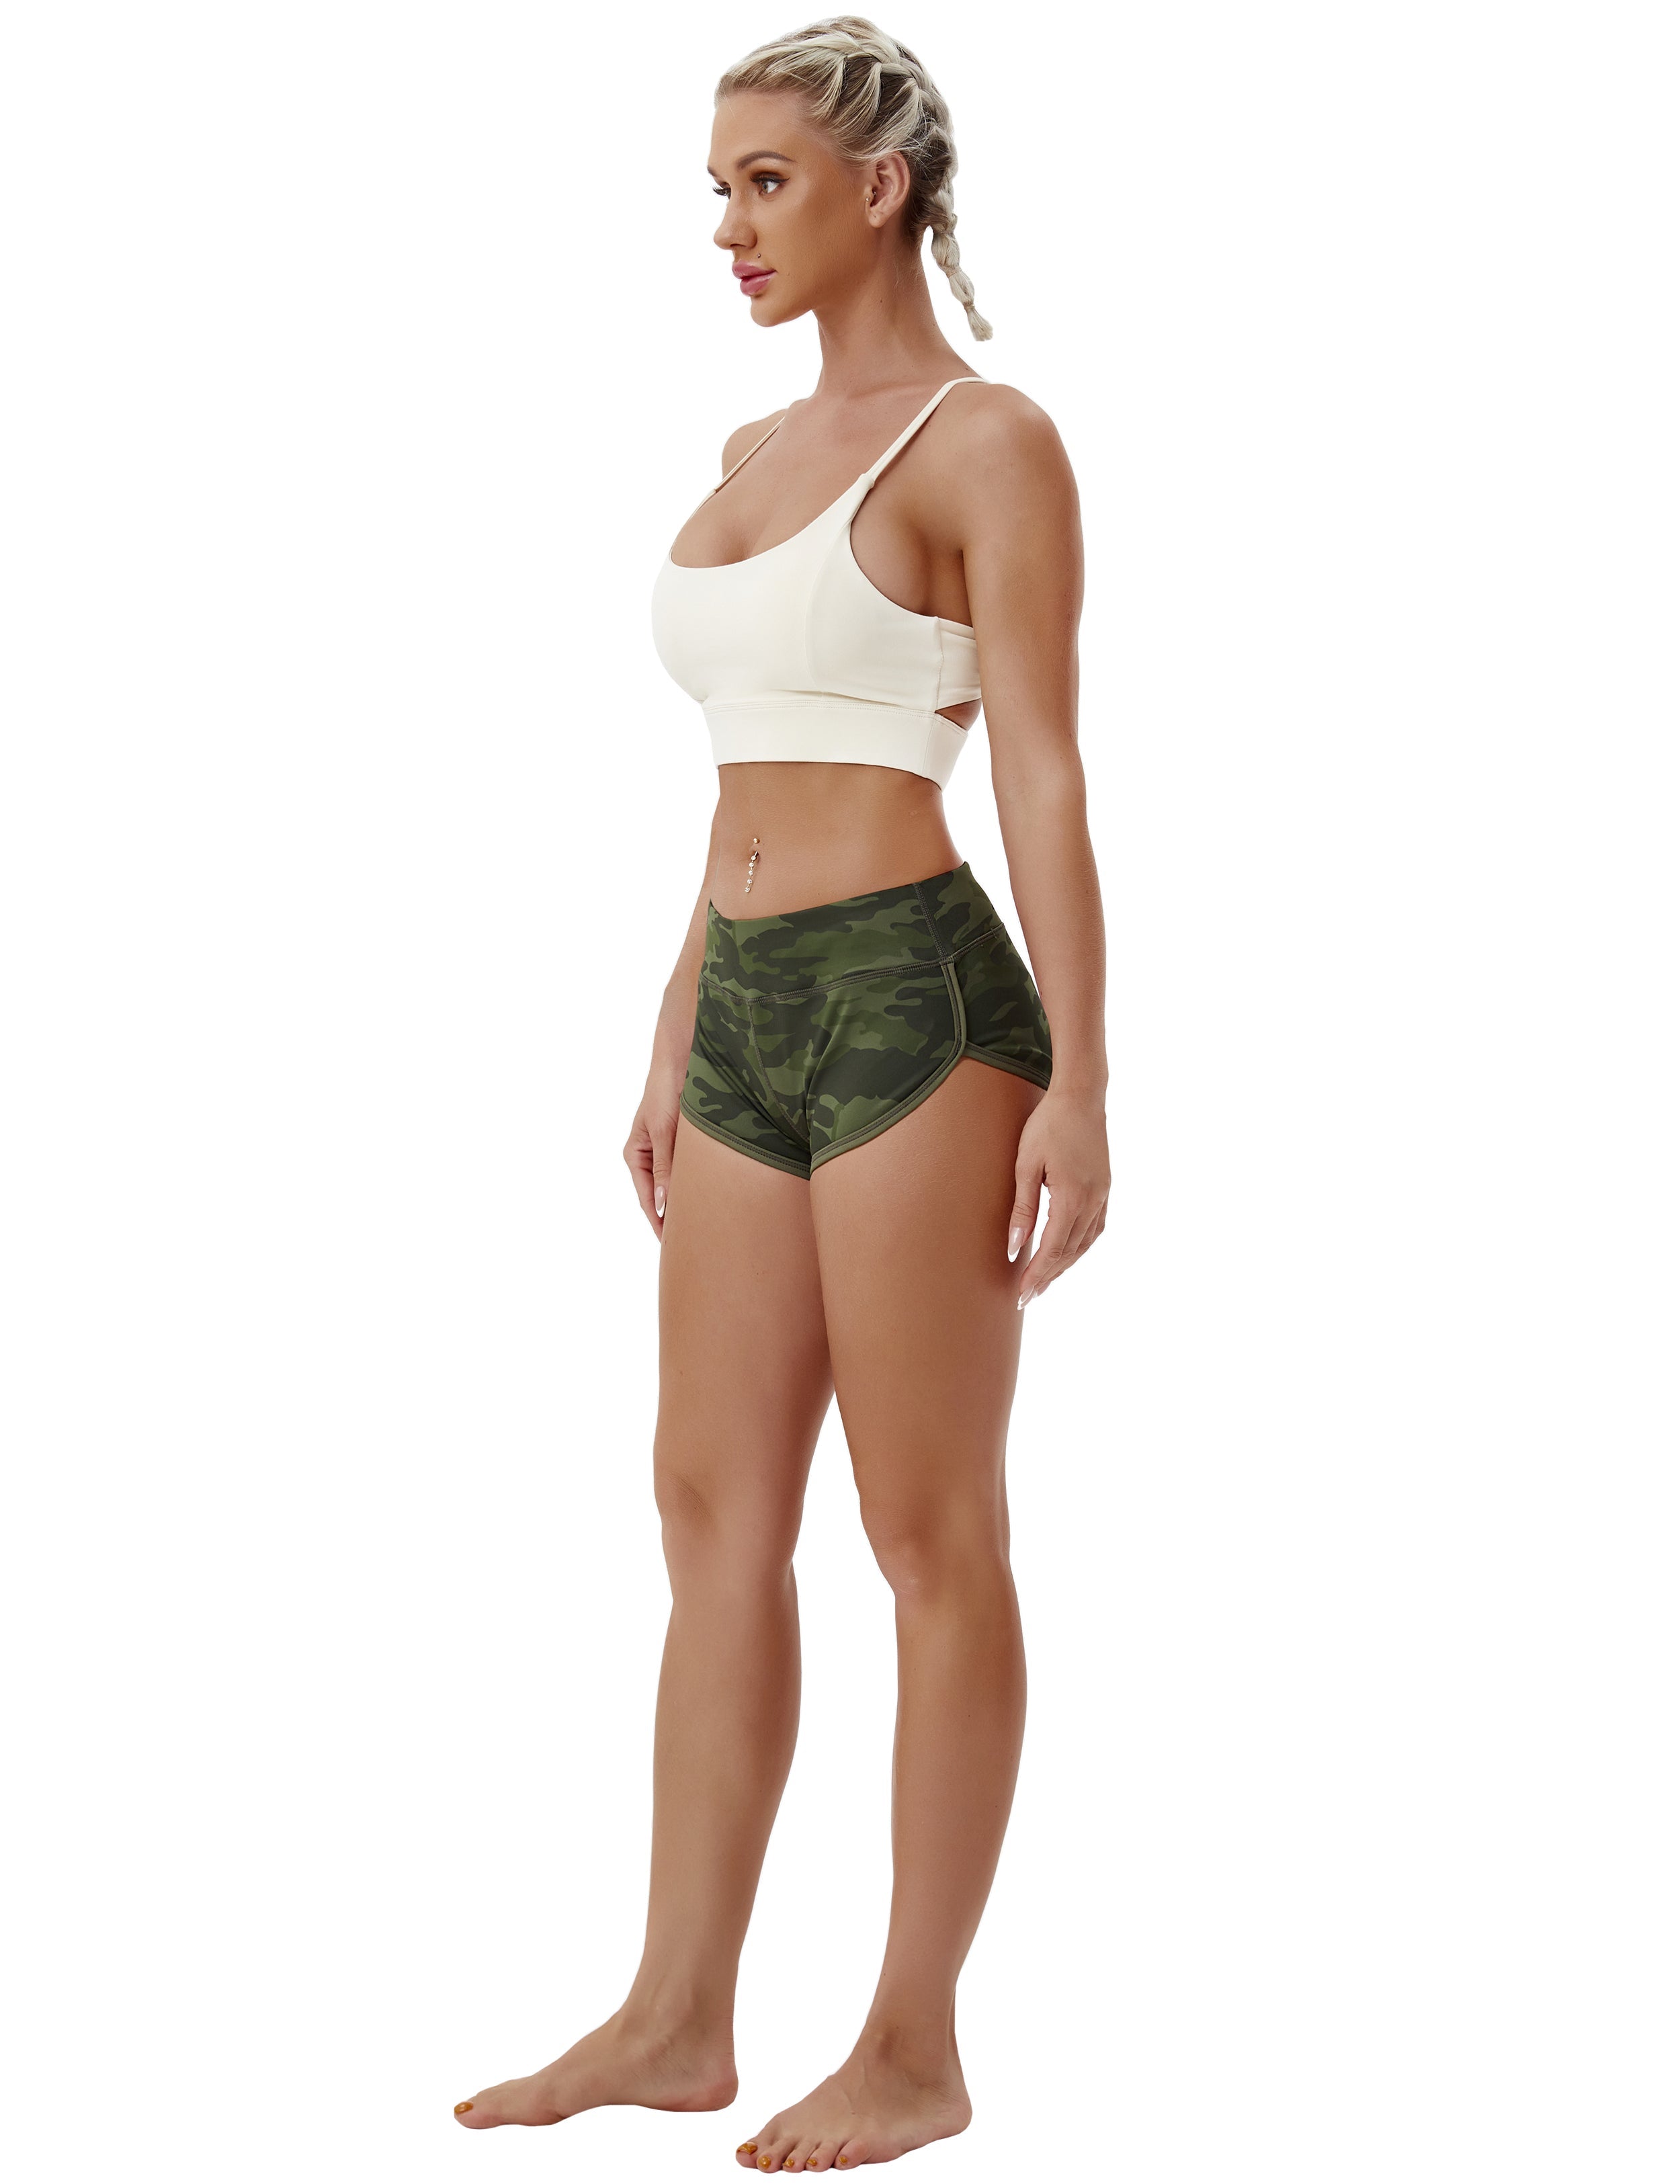 Printed Booty Gym Shorts green camo Sleek, soft, smooth and totally comfortable: our newest sexy style is here. Softest-ever fabric High elasticity High density 4-way stretch Fabric doesn't attract lint easily No see-through Moisture-wicking Machine wash 78% Polyester, 22% Spandex